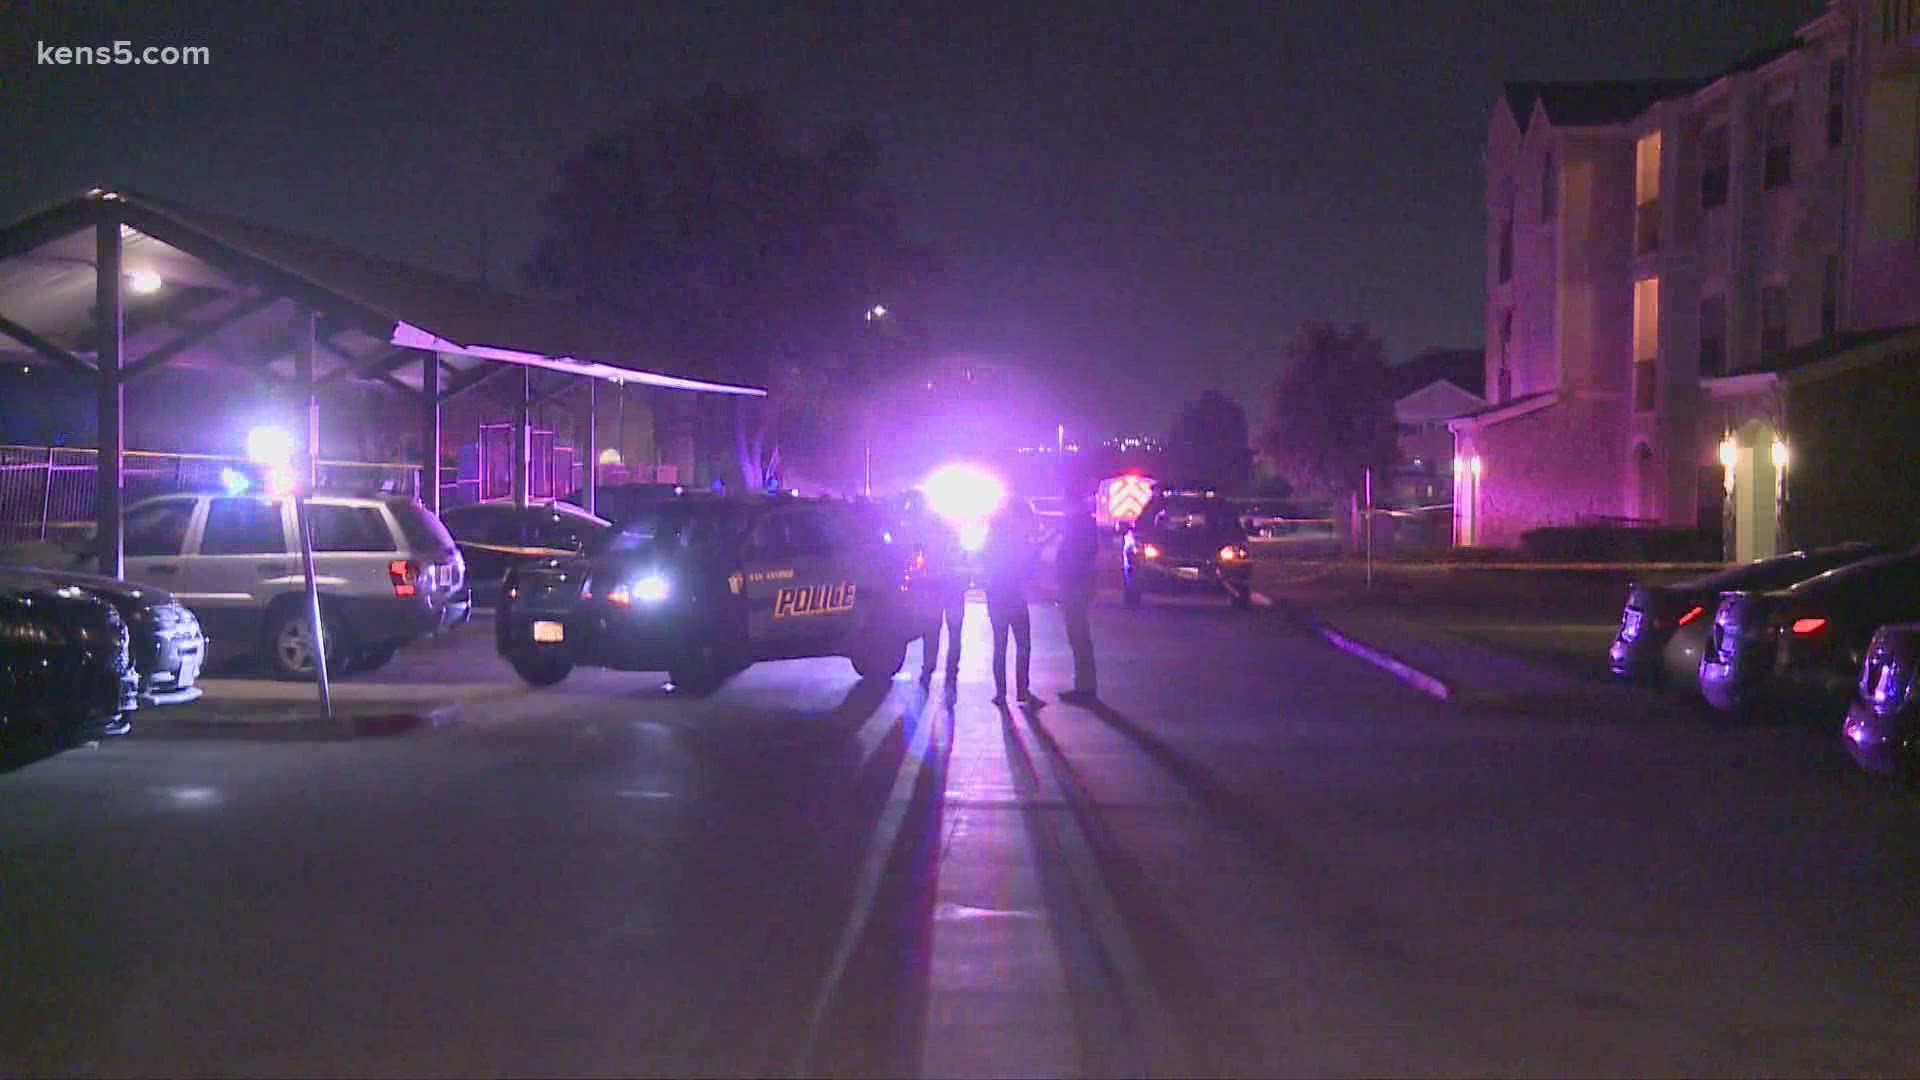 Police are looking for a gunman who shot a woman and girl in a road rage incident overnight.